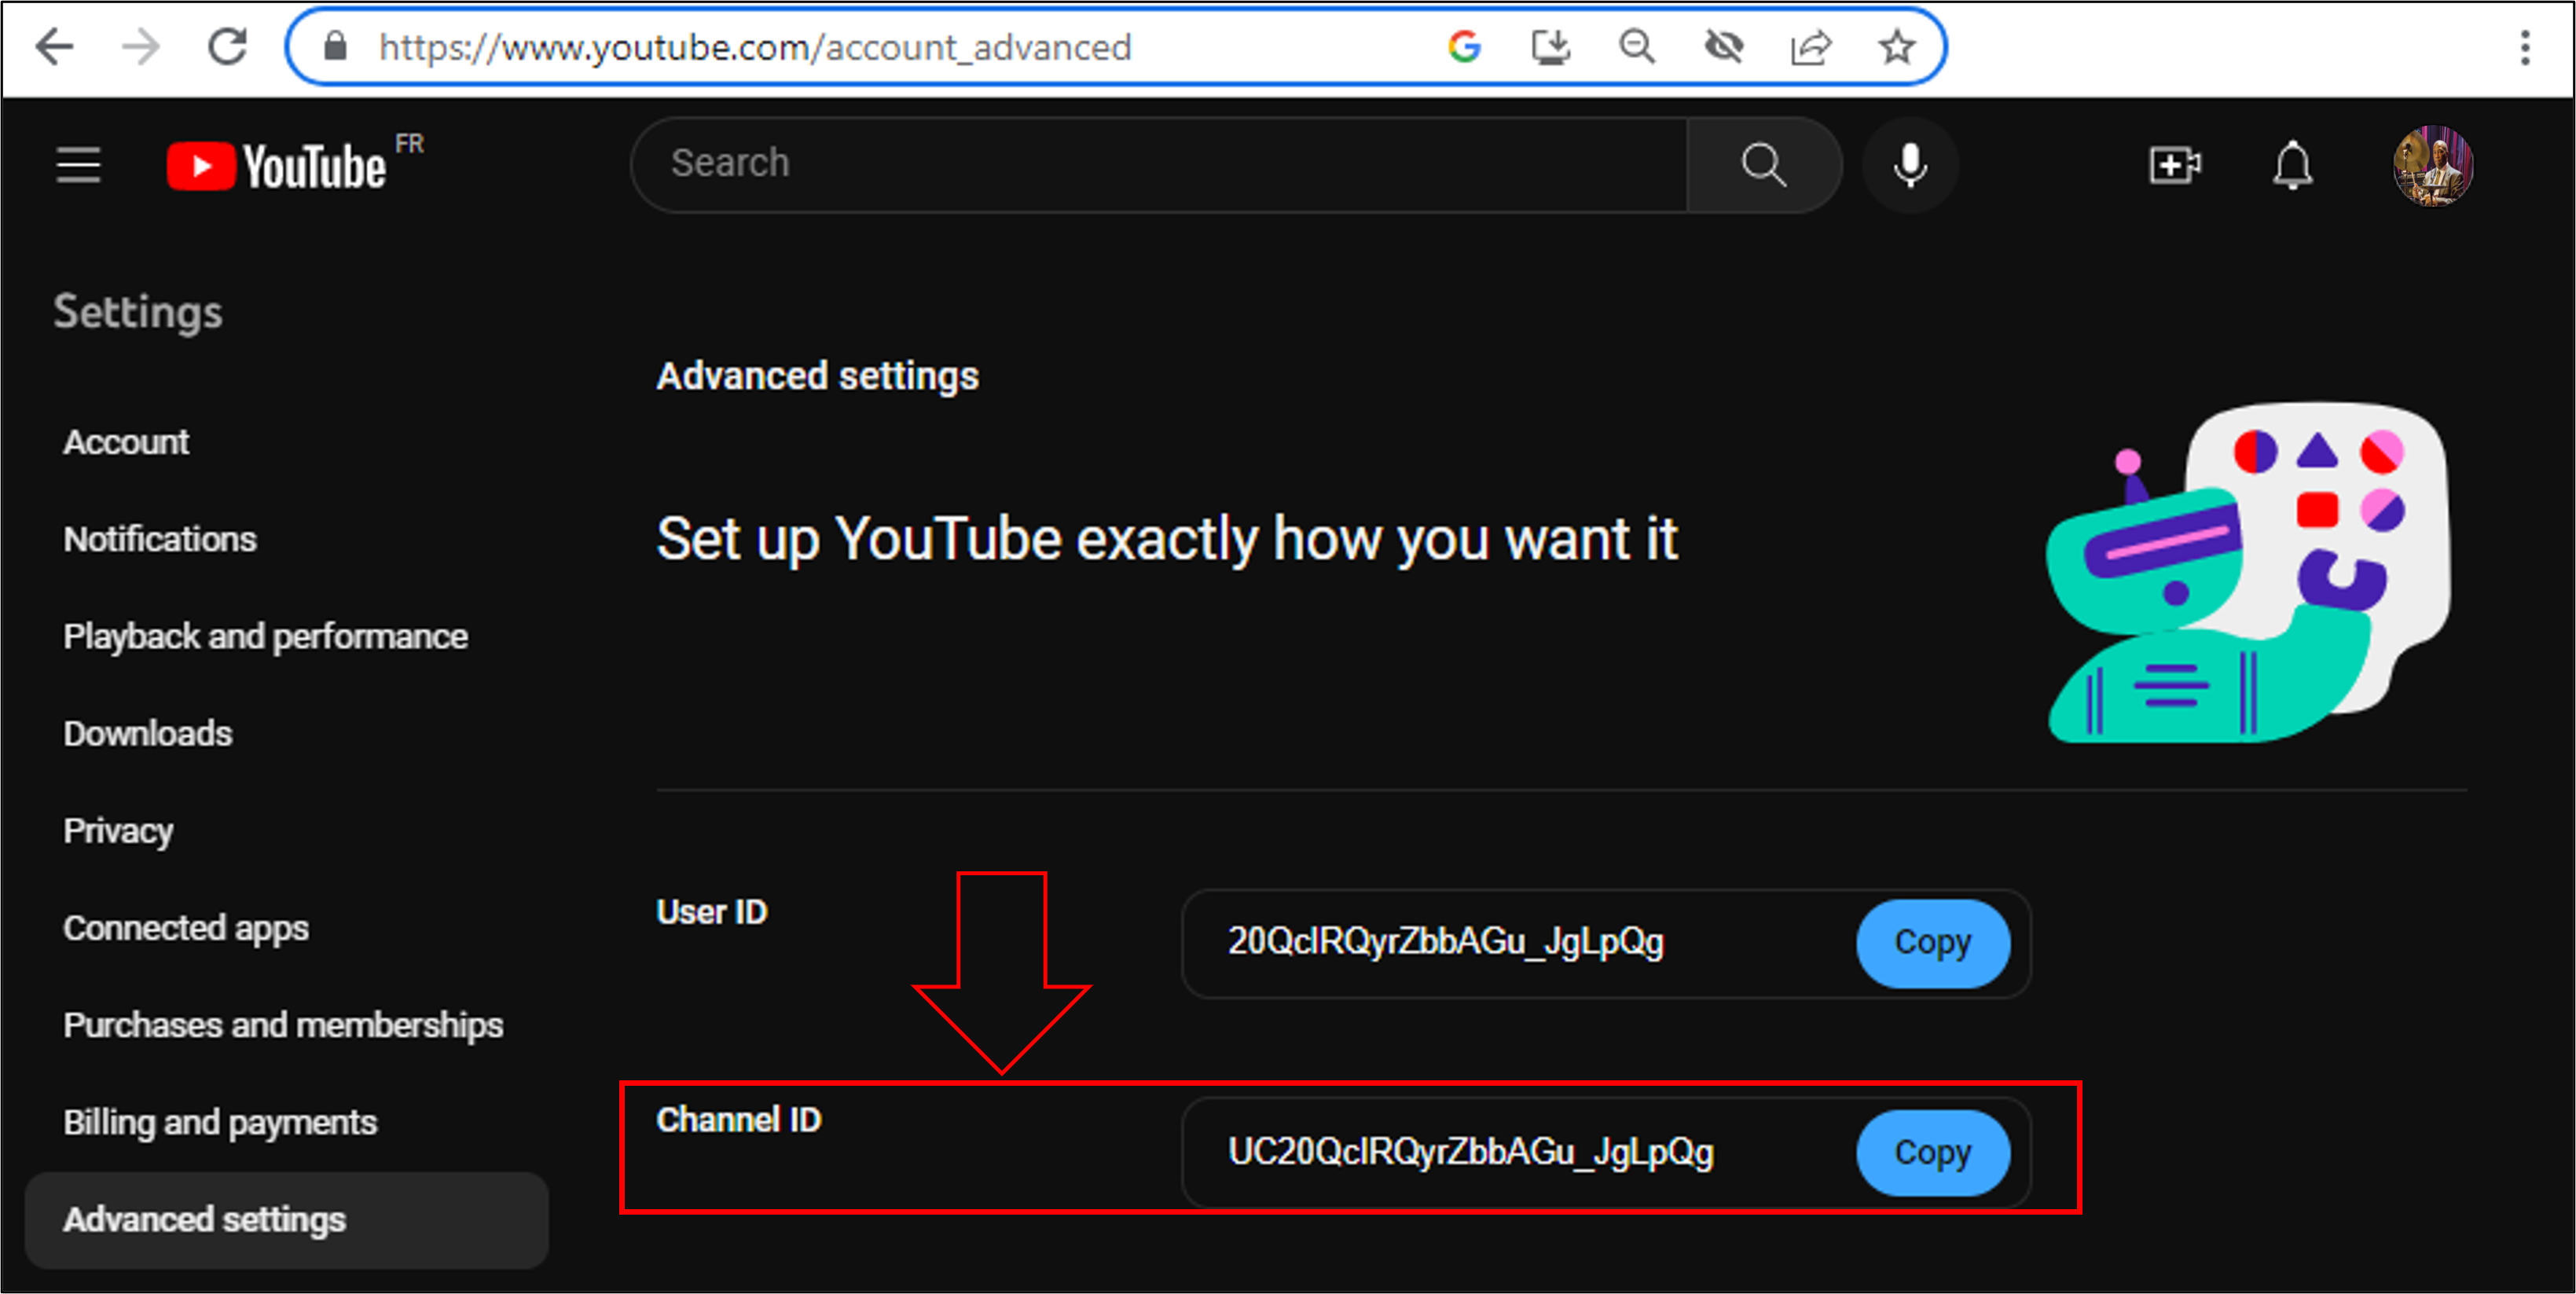 YouTube_channelID_in_browser_2.png